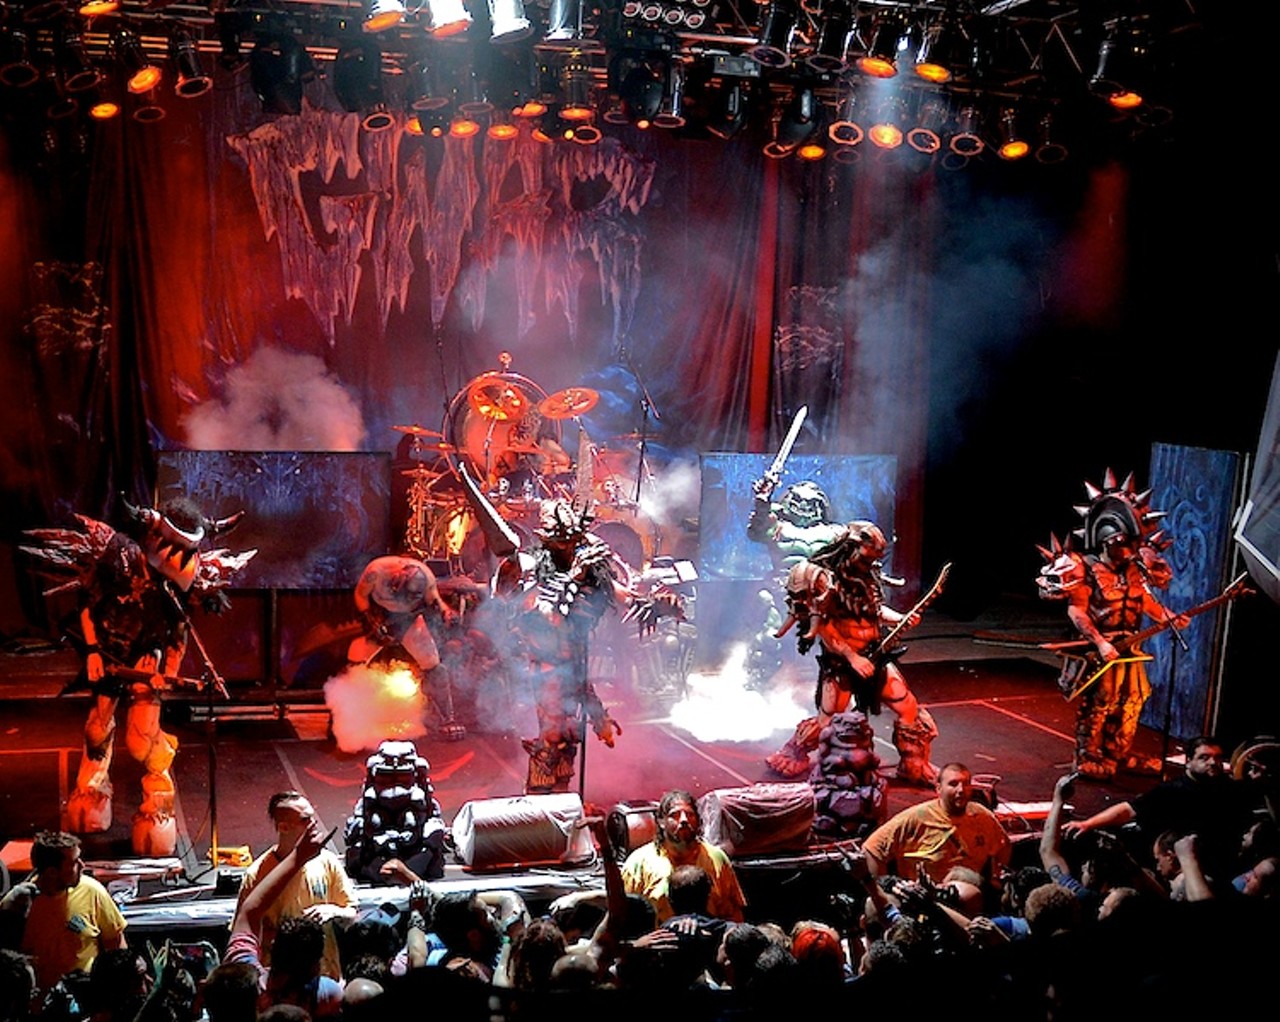 16 Photos from the Gwar concert at House of Blues